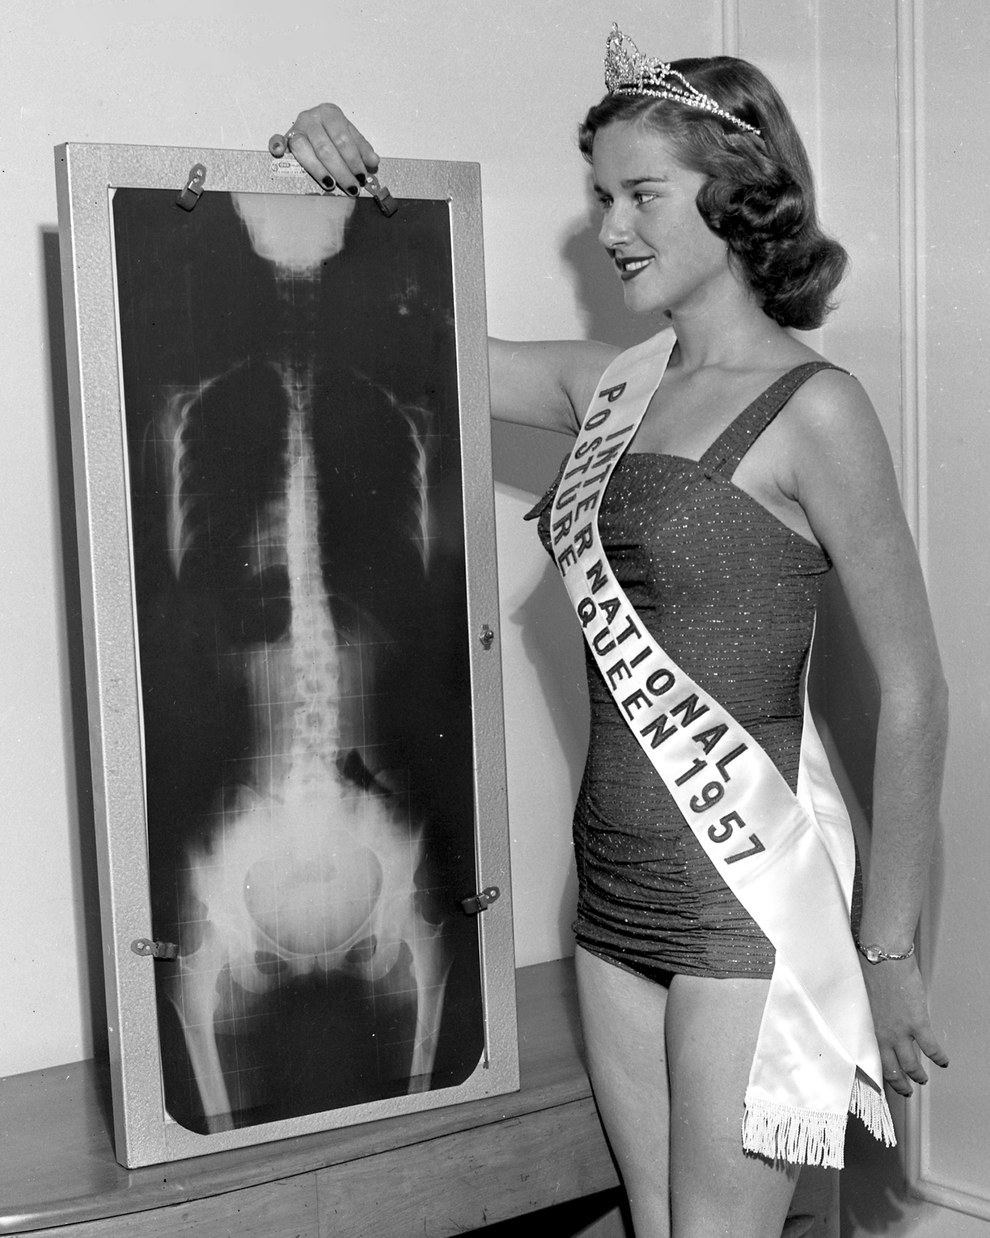 These 22 Vintage Beauty Pageants And Queens From Between The 1950s And